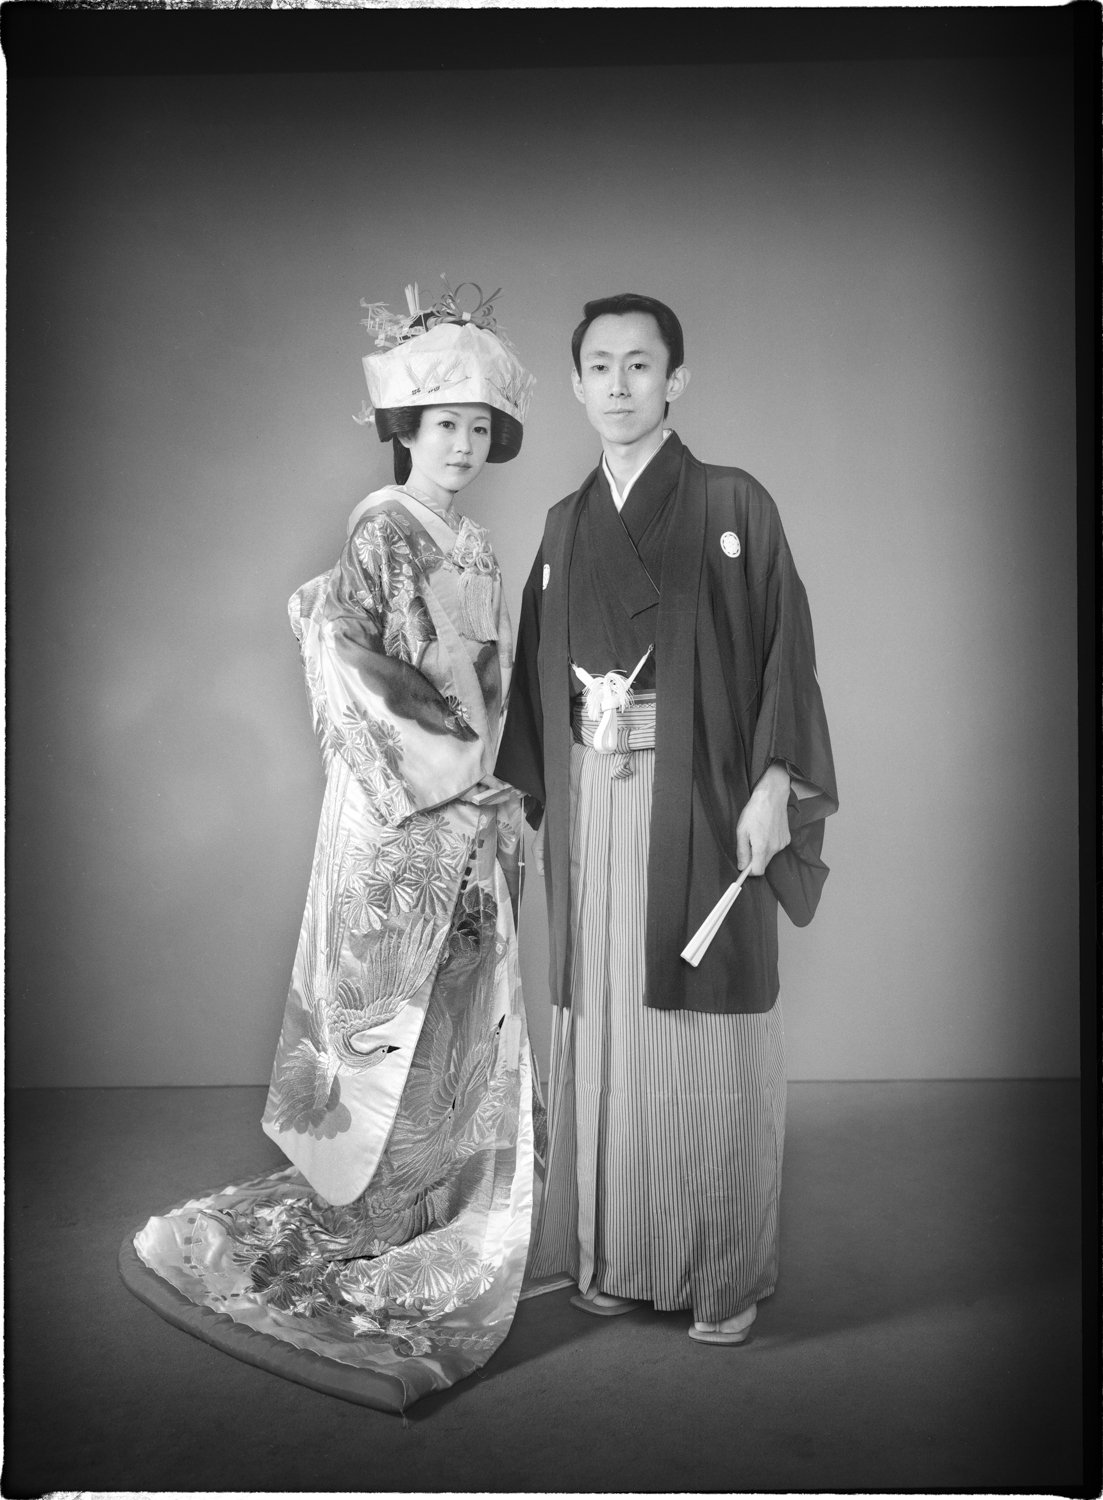 Portrait of a Japanese couple in their traditional costume Photography Pierre Toutain-Dorbec #014 .jpg